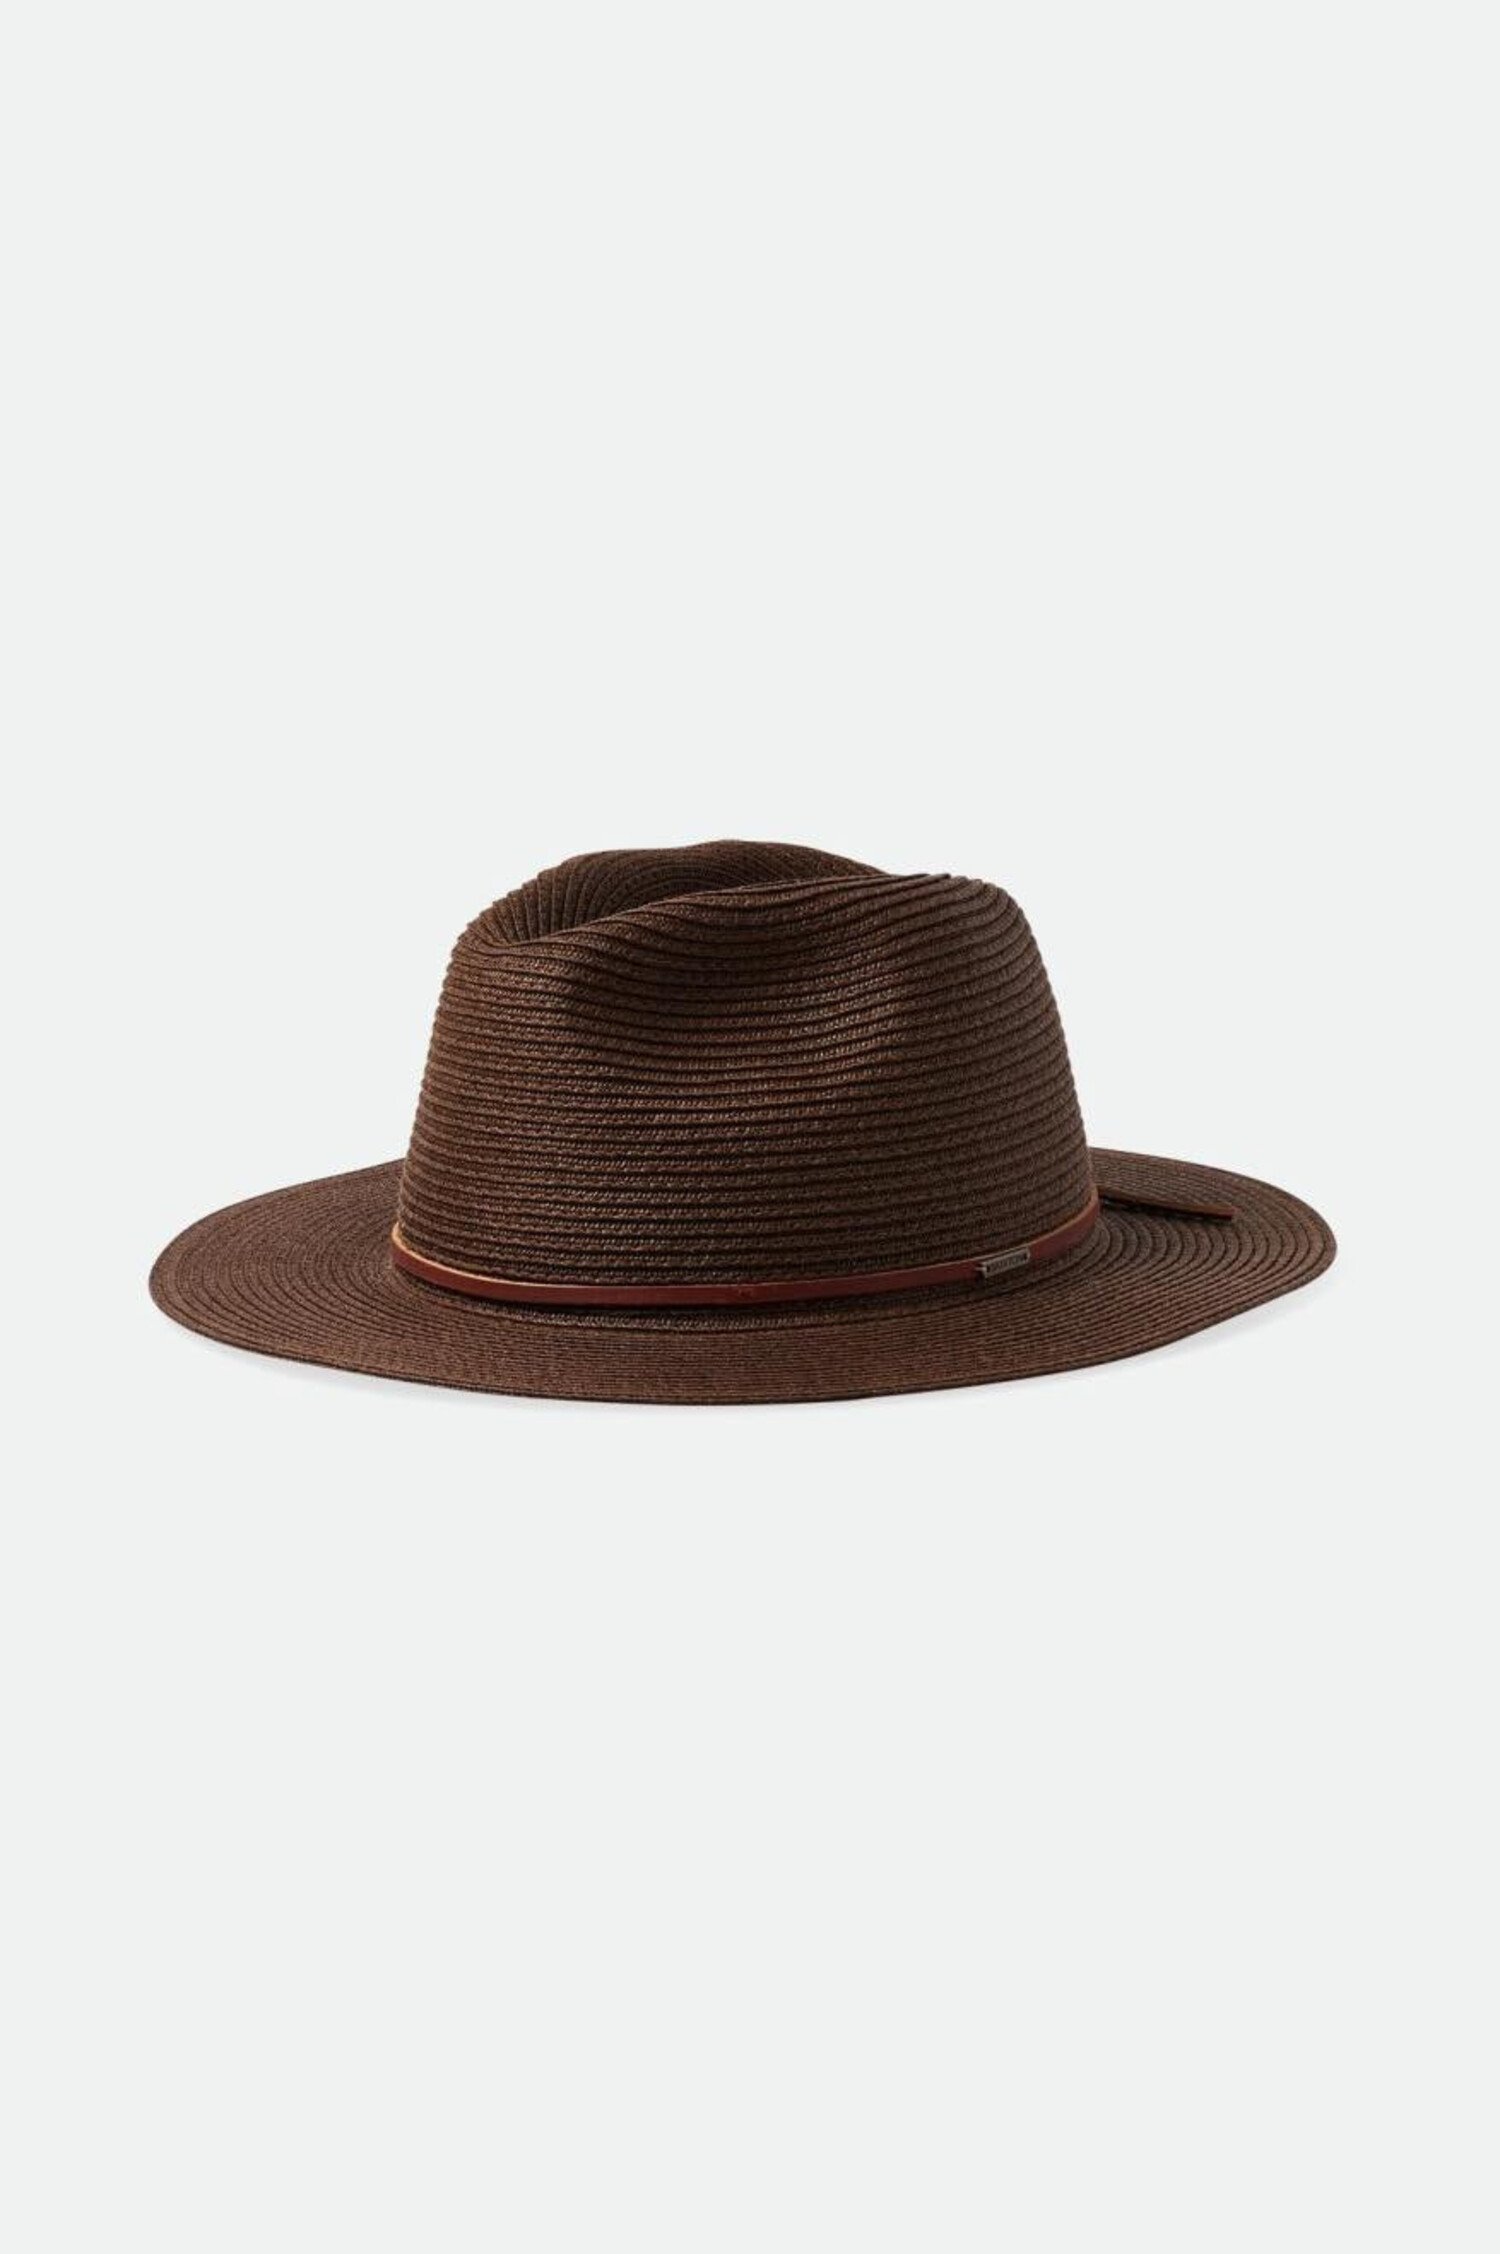 BRIXTON WESLEY STRAW PACKABLE HAT DARK EARTH - The Choice Shop